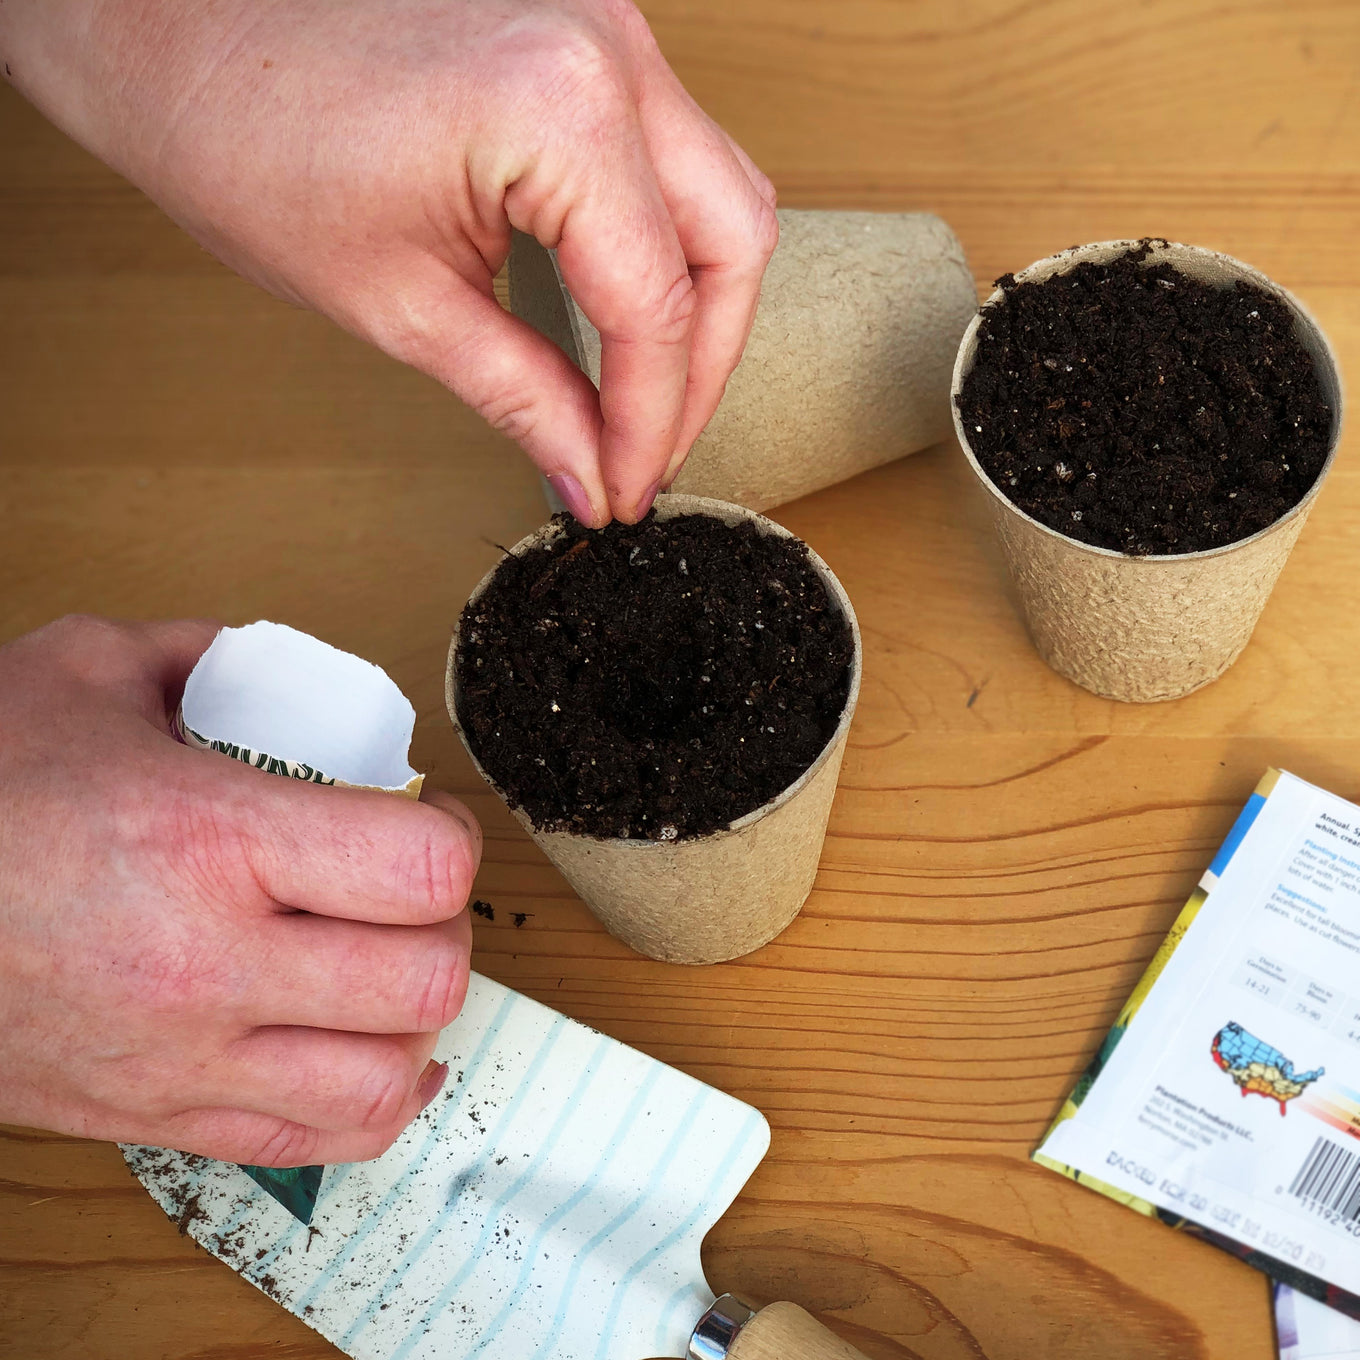 Start your Big Rainbow Heirloom Tomato seeds in biodegradable peat or paper pots for easy seedling transplants.